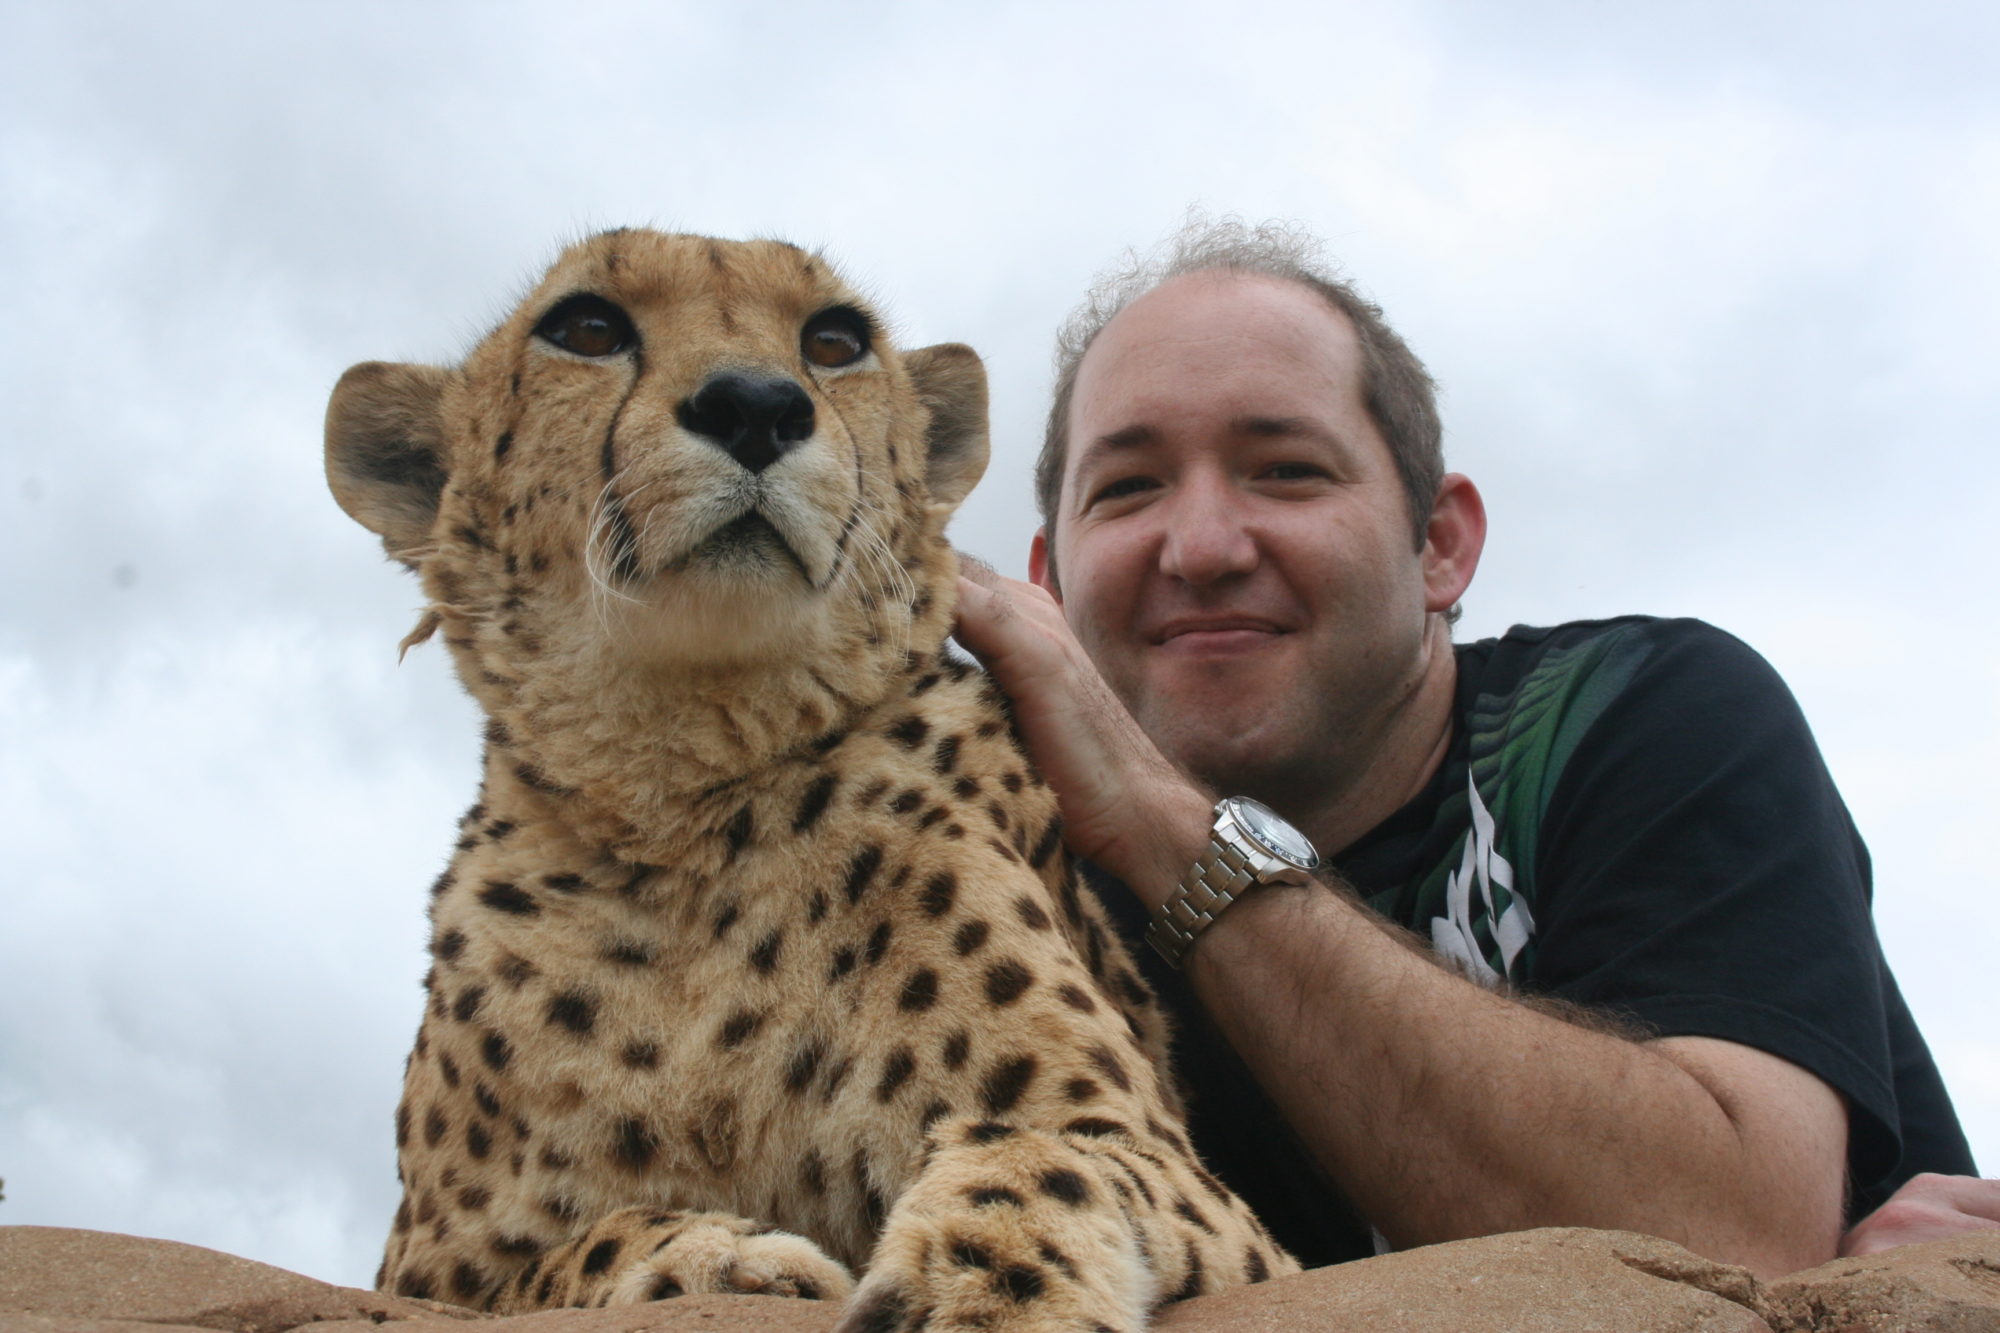 A man stroking a cheetah photographed from below